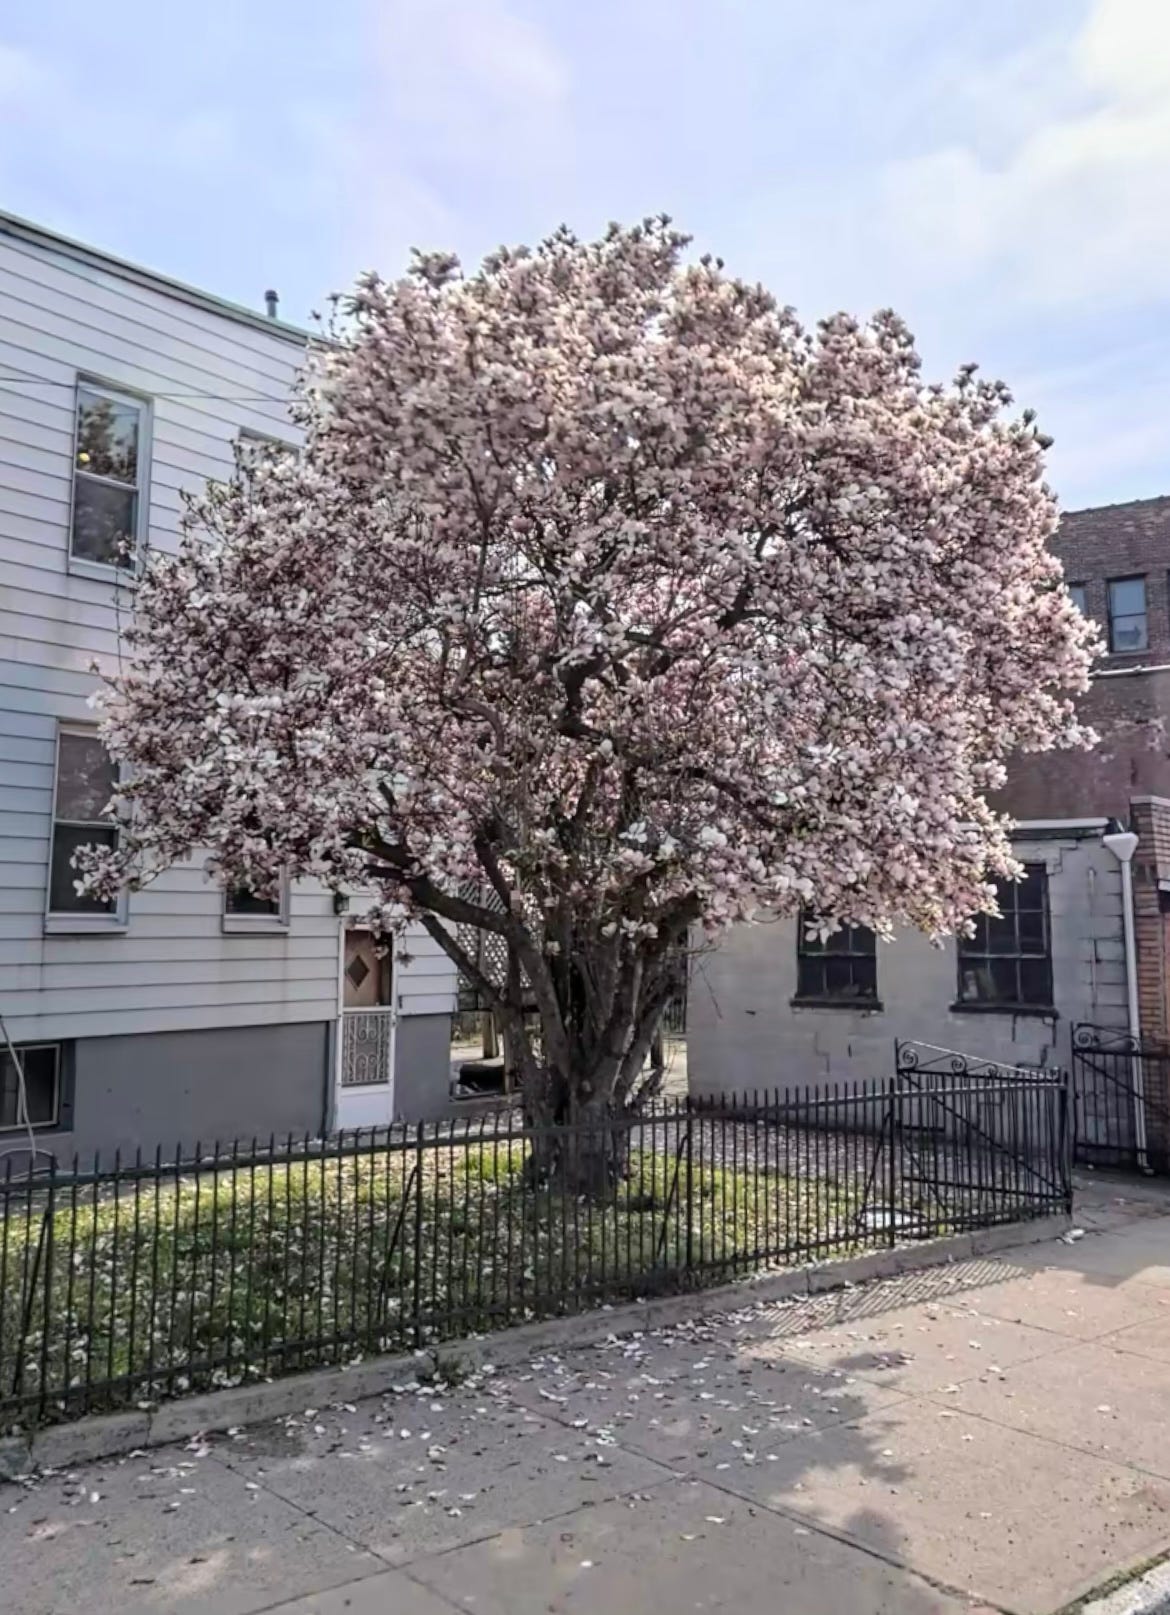 A gorgeous magnolia tree in full bloom!